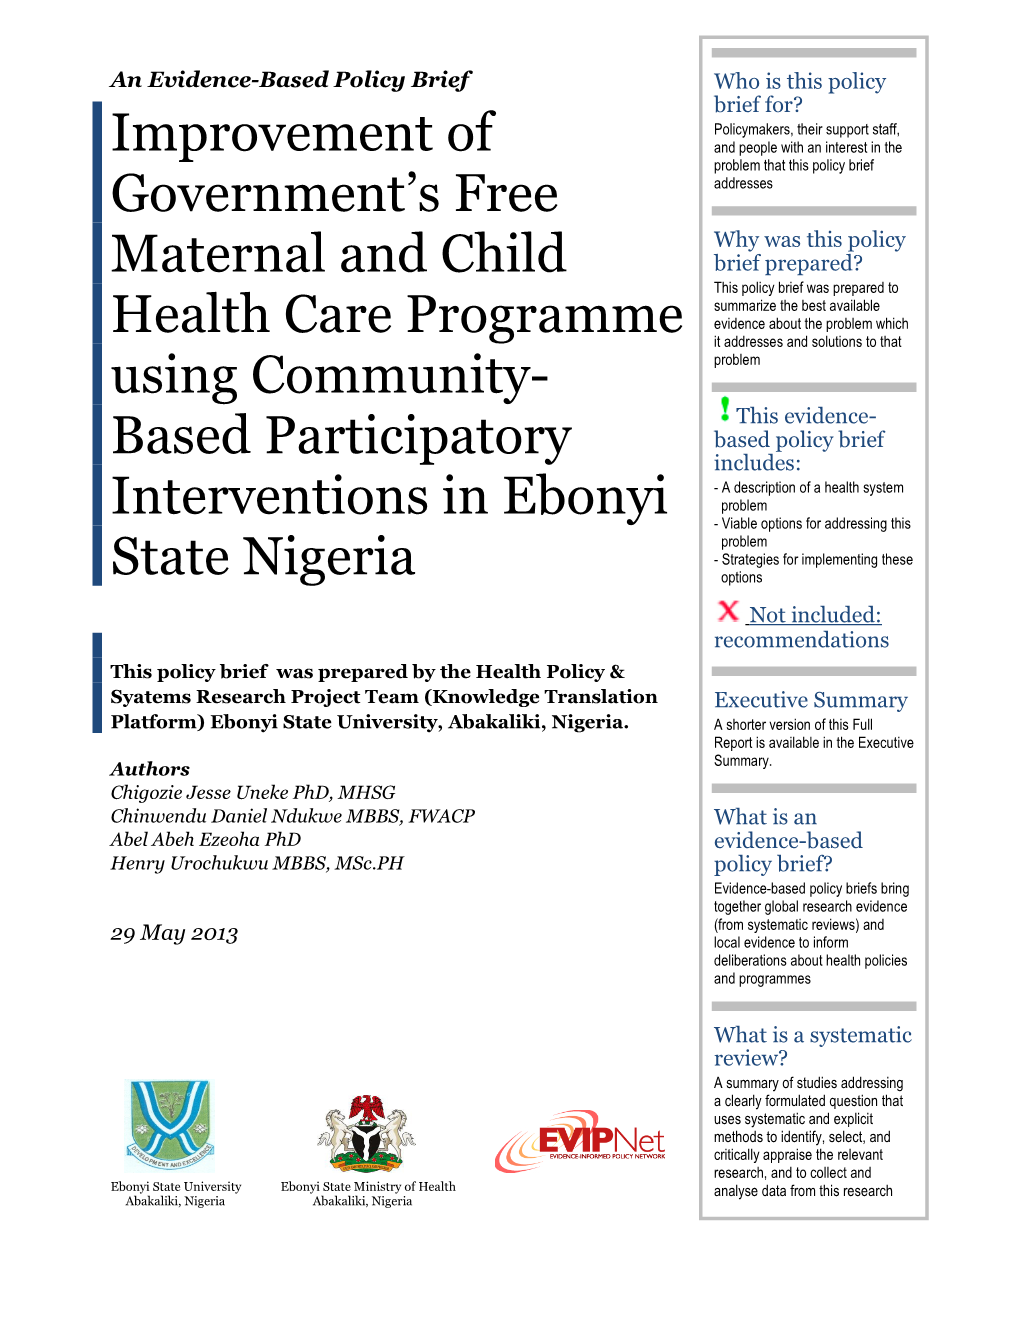 Improvement of Government's Free Maternal and Child Health Care